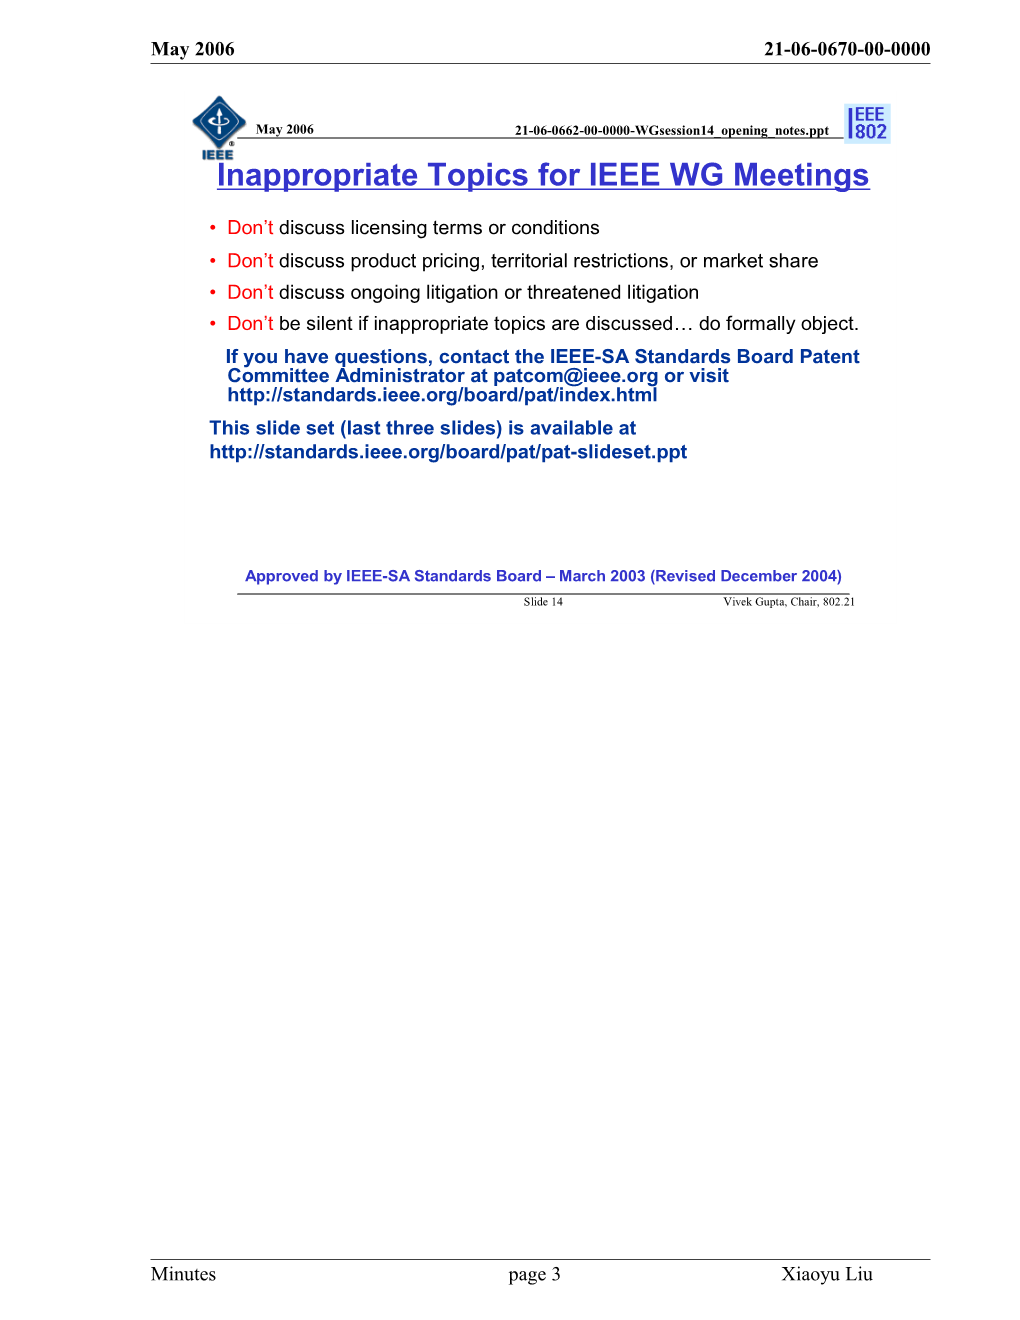 Tentative Minutes of the IEEE P802.21 Working Group s3